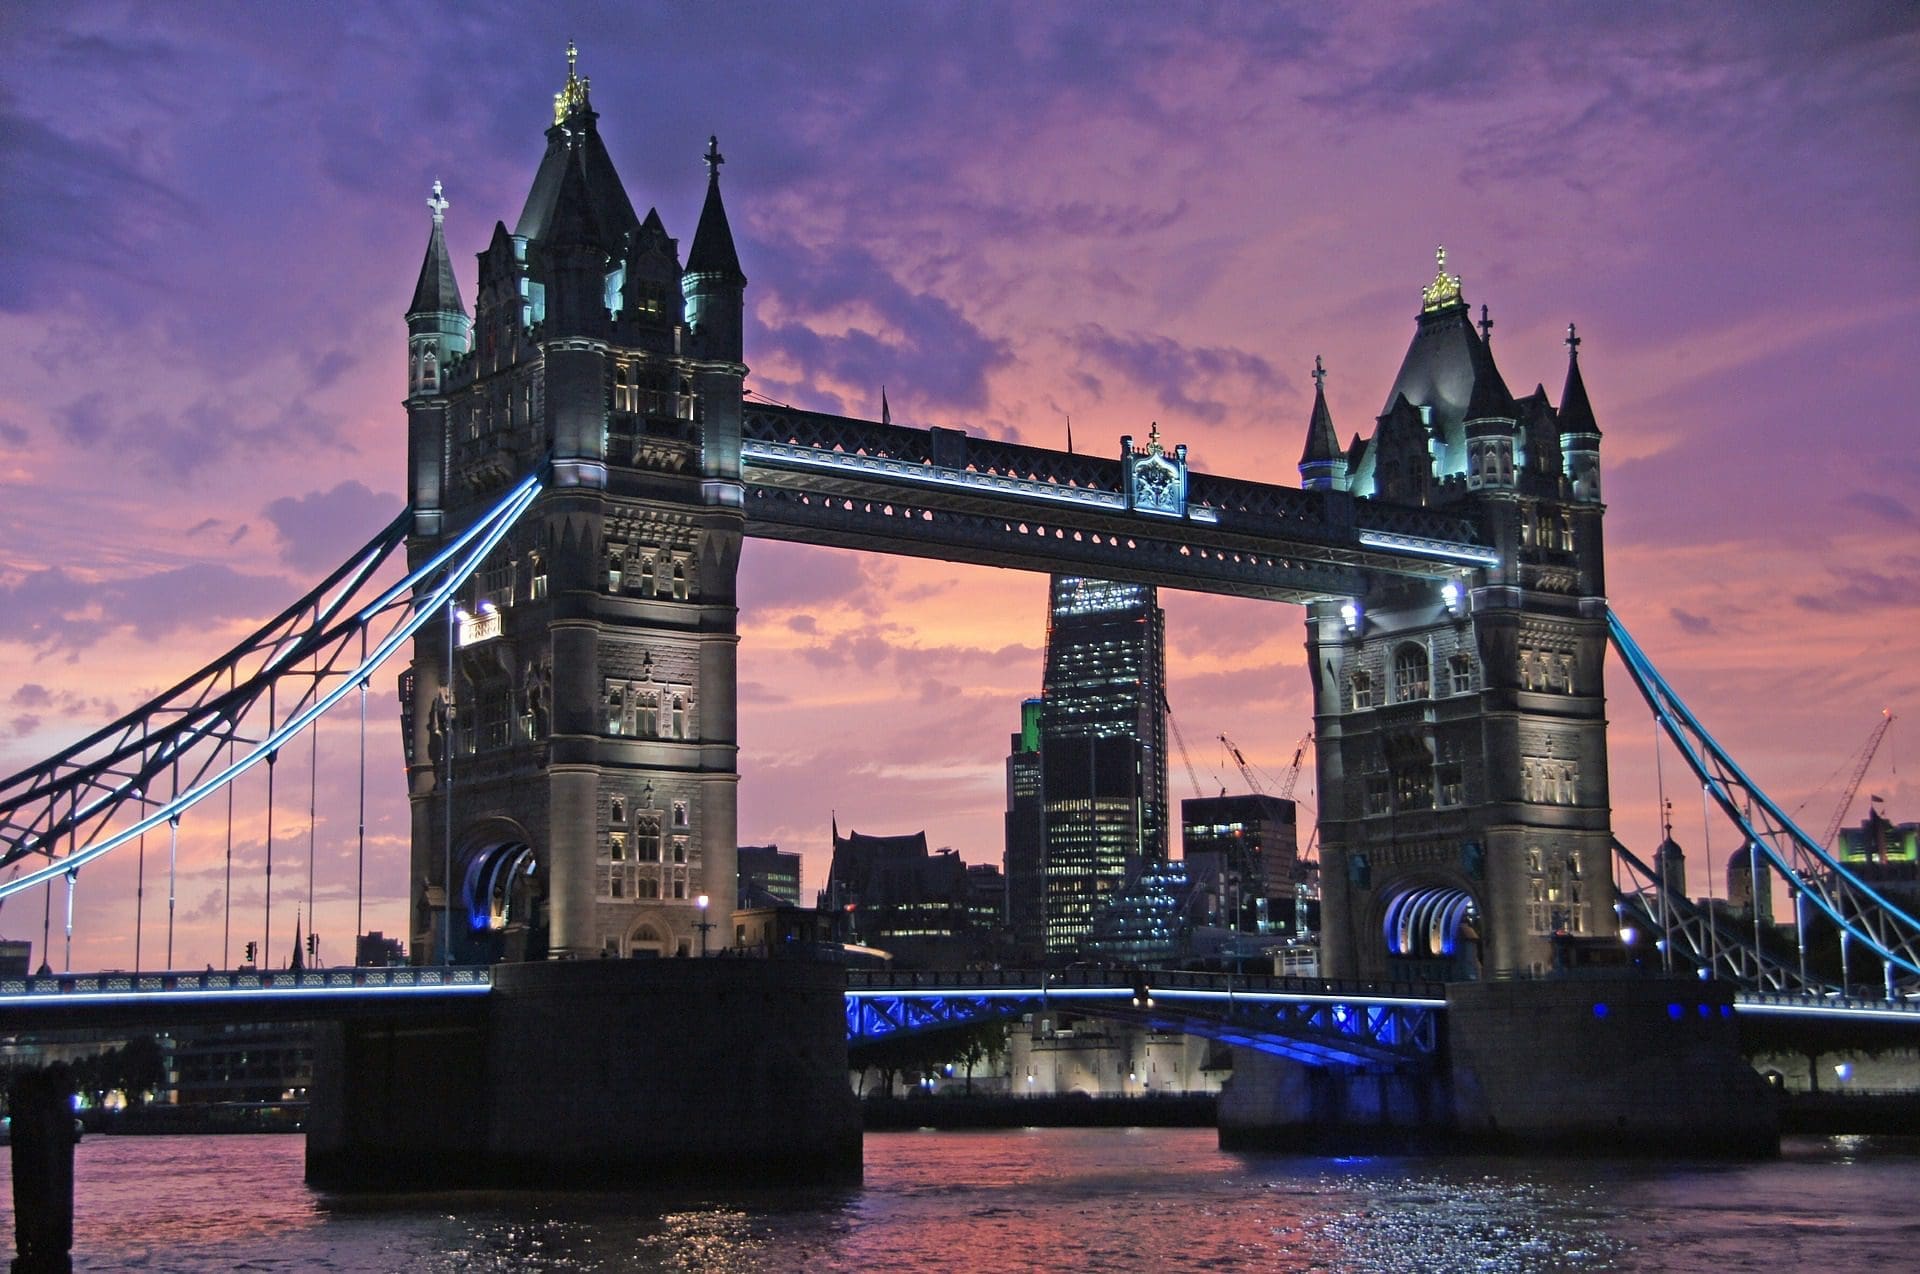 Suggested Travel Itinerary for an Amazing London Holiday